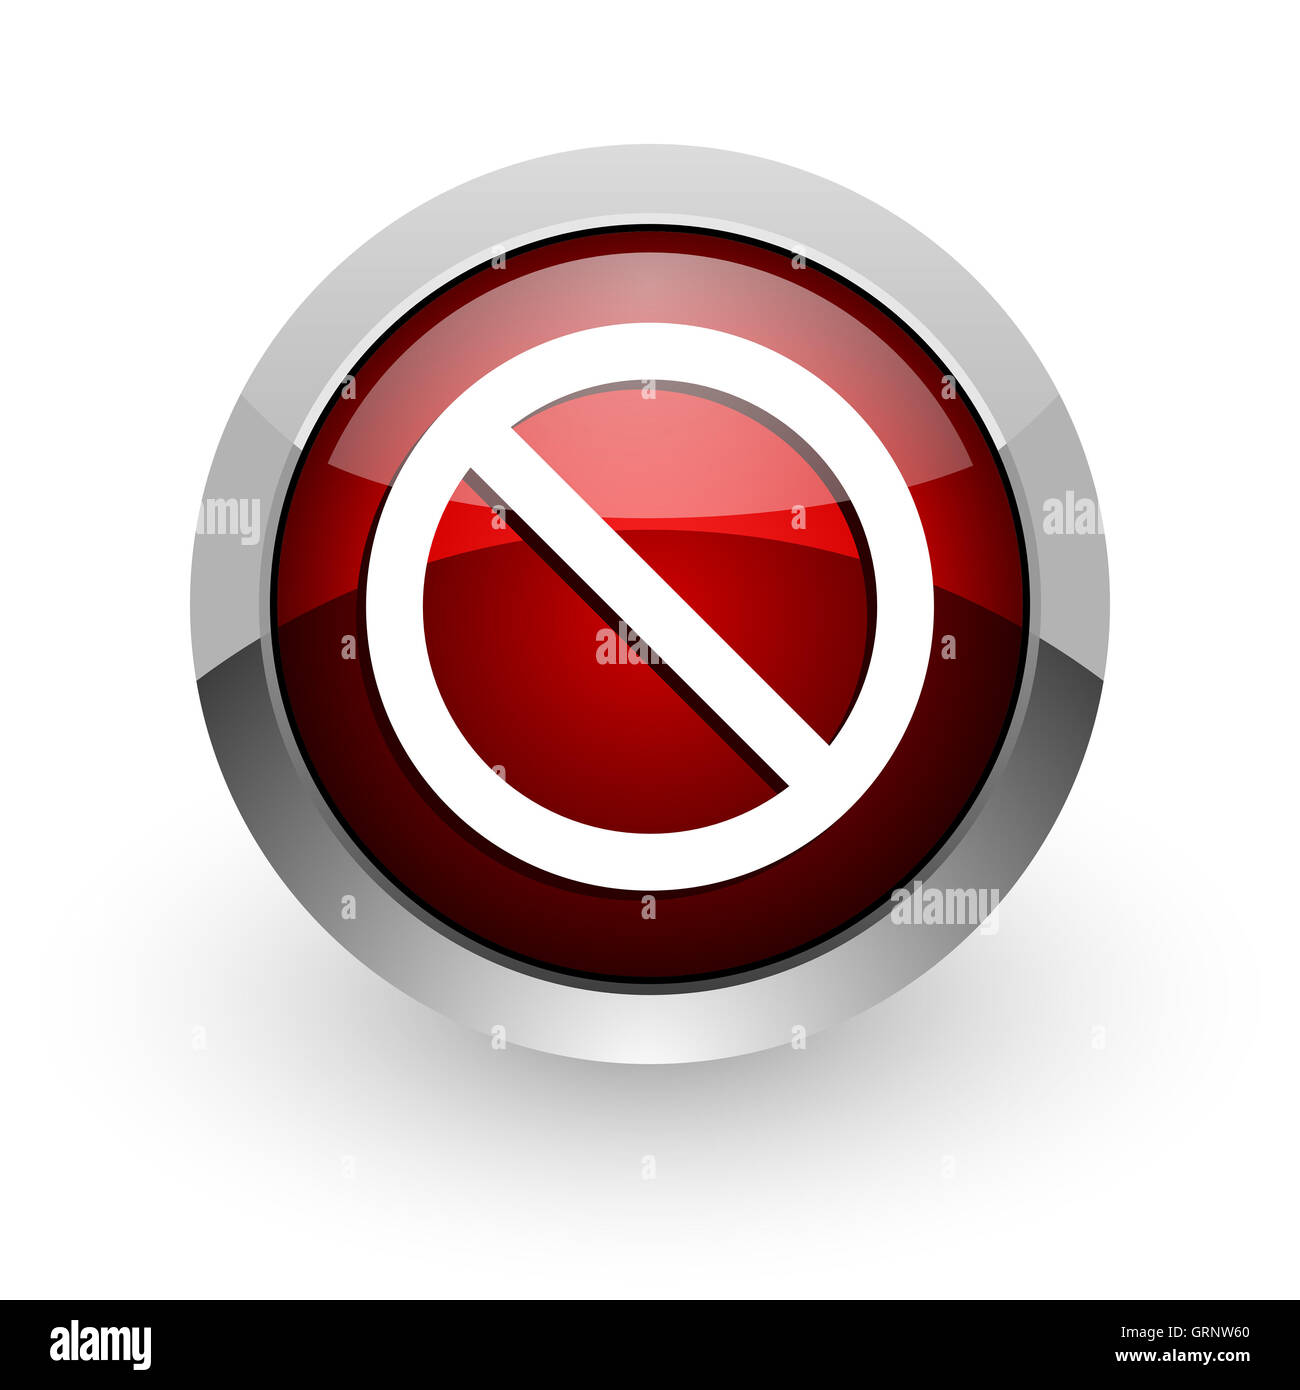 access denied red circle web glossy icon Stock Photo